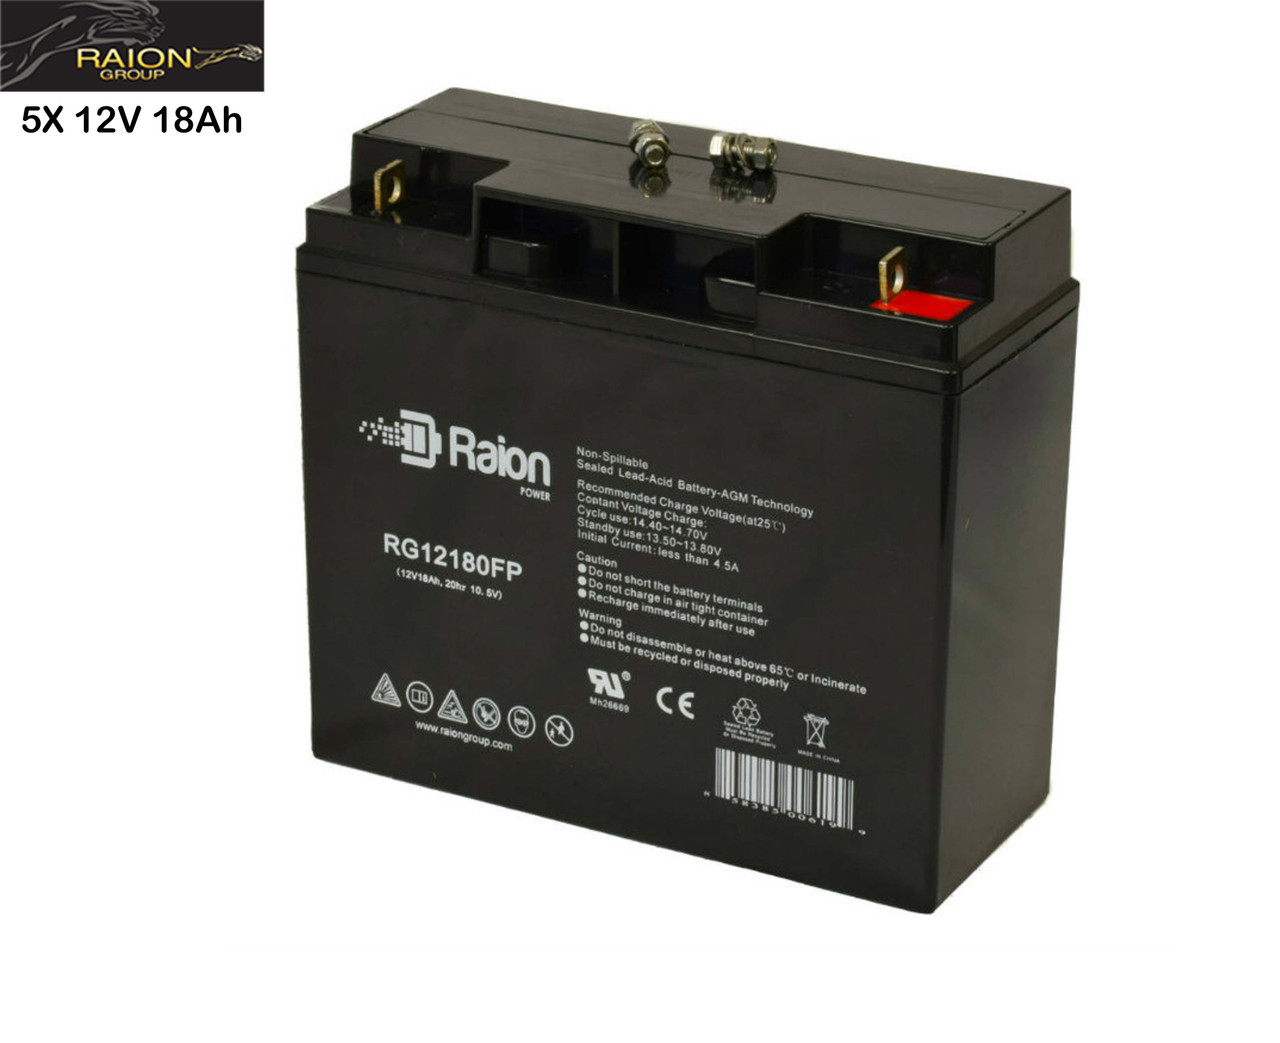 Raion Power Replacement 12V 18Ah Battery for Volt Canada XPRES - 5 Pack